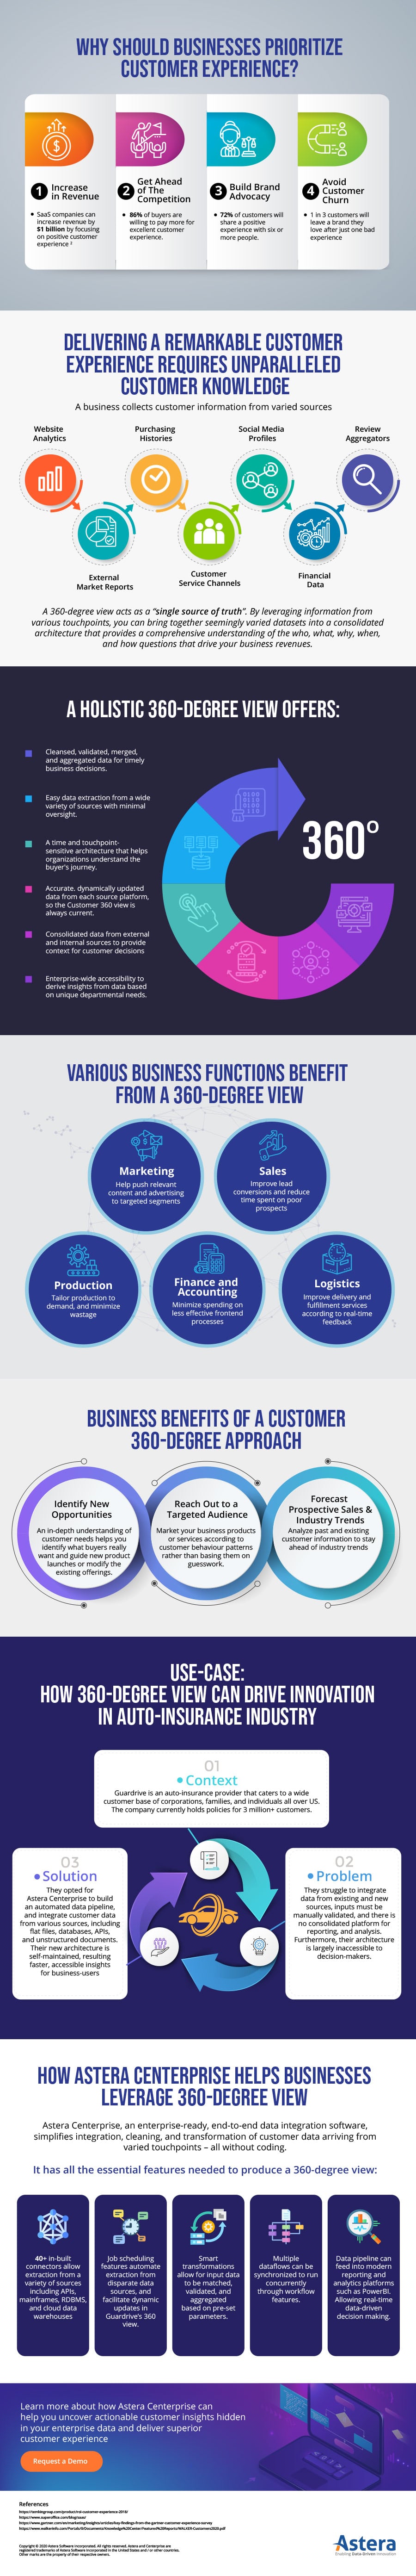 Gaining Insights into Your Customers and Target Segments with An Integrated Customer 360 View infographic